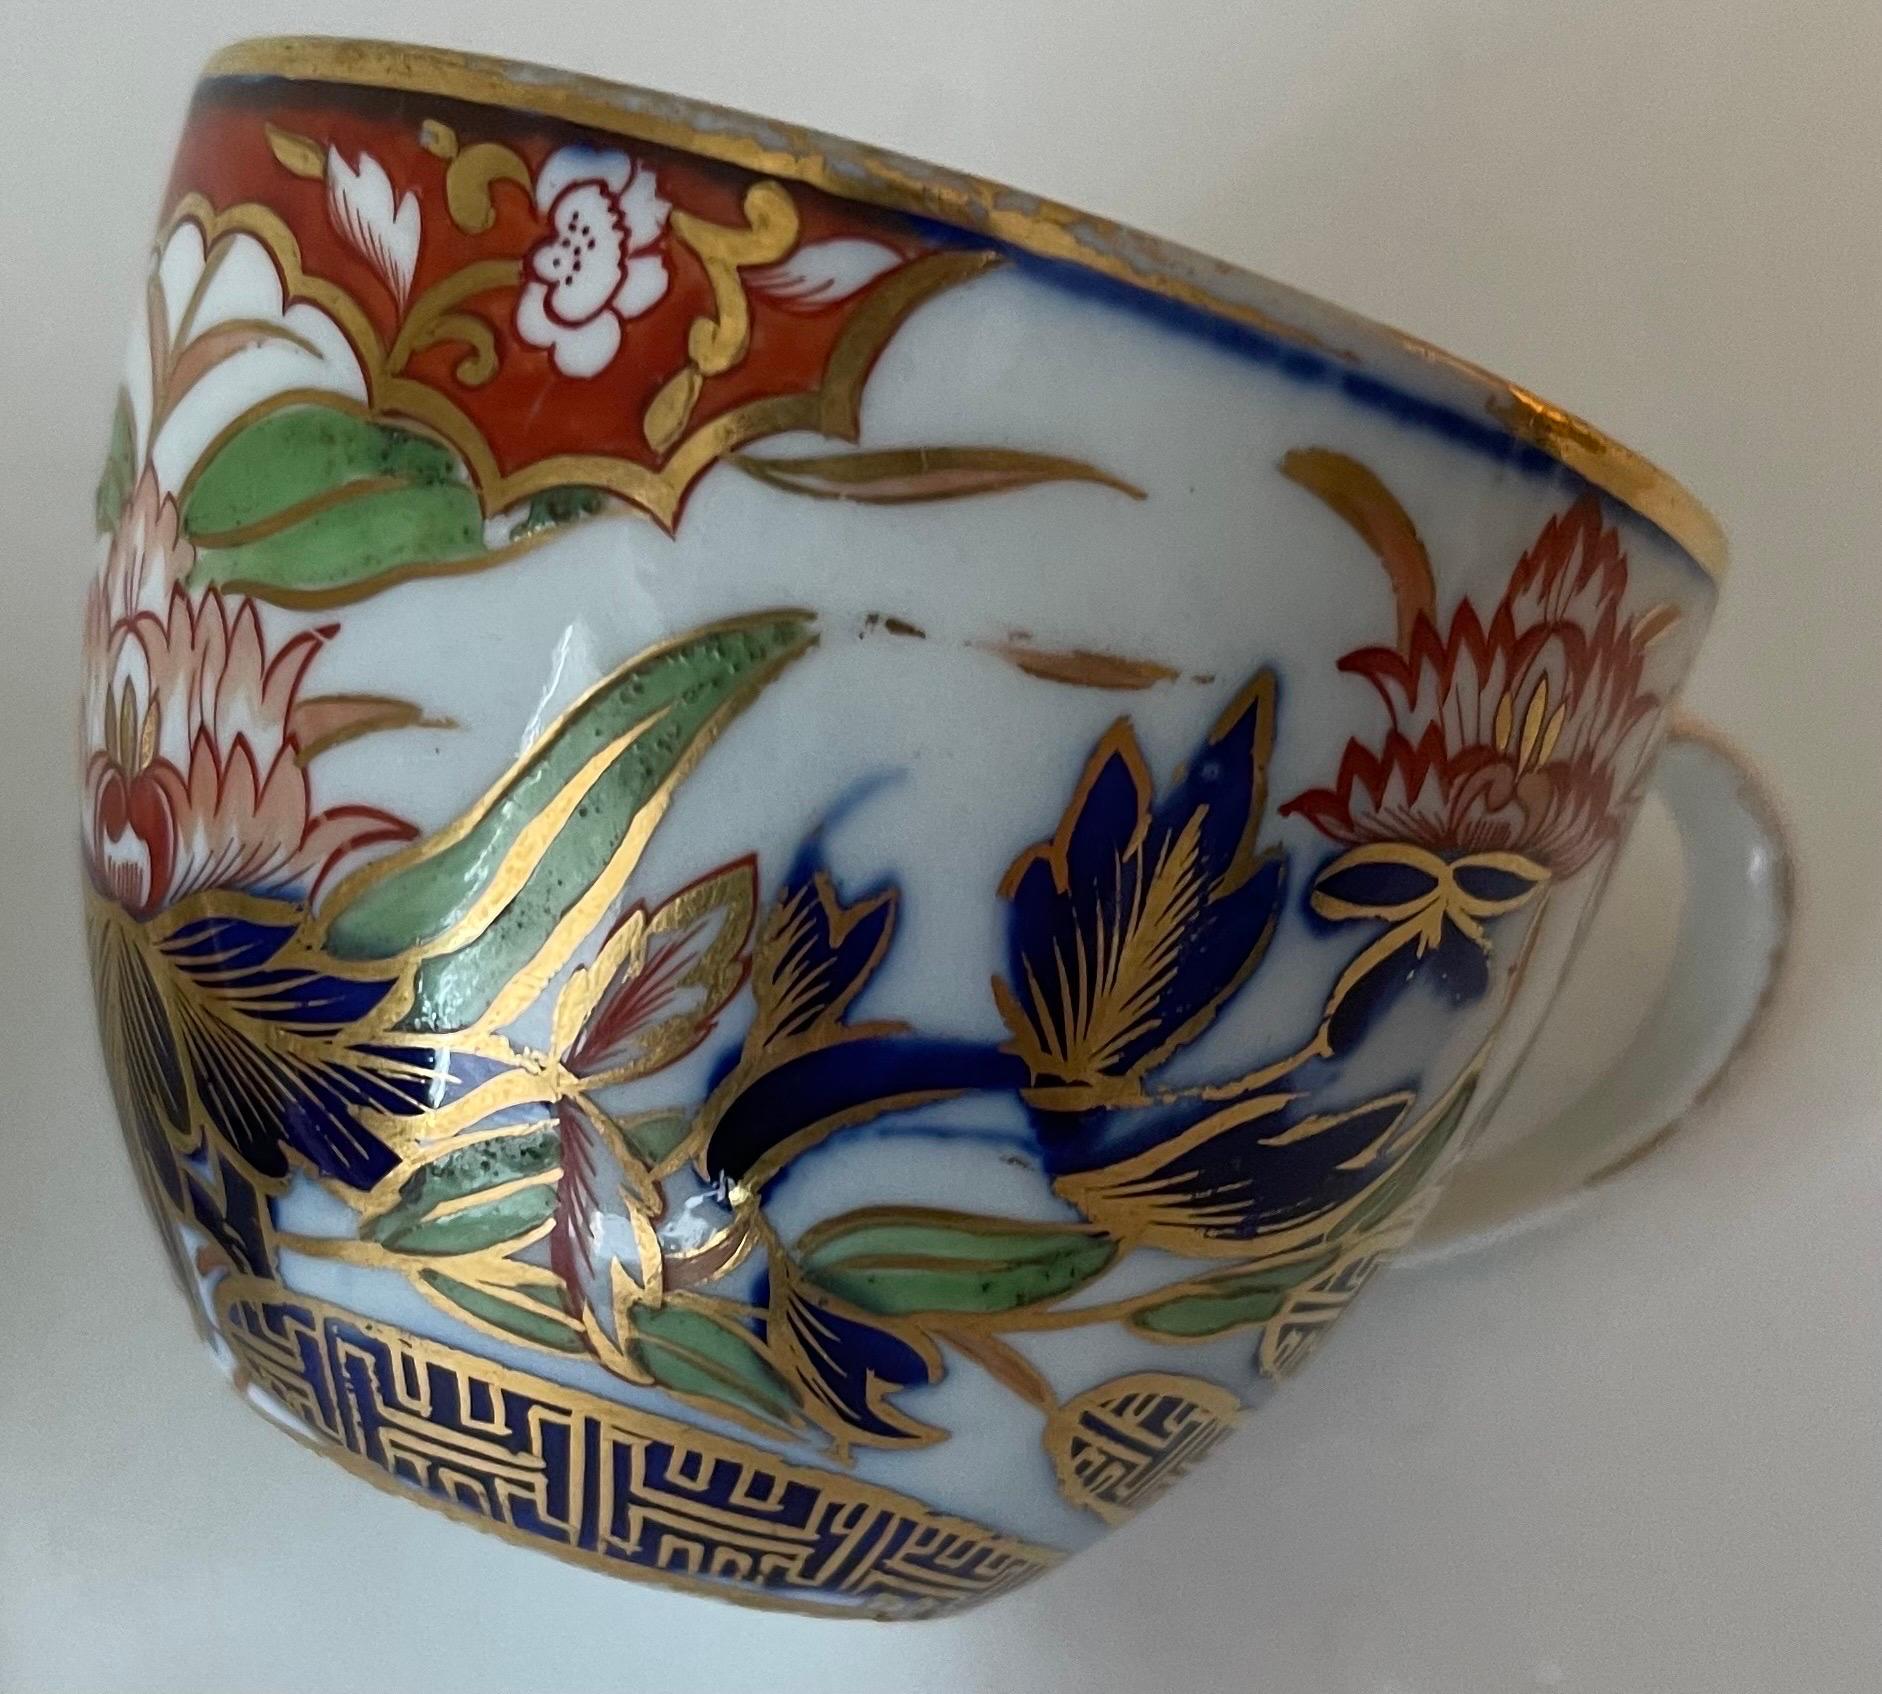 Early 1800s Coalport John Rose Thumb and Finger teacup and saucer: Hand painted, richly colored and detailed cup and saucer with hand painted gold band. No makers mark or signature. 
Cup measures: 4” wide x 3” tall. Saucer measures 5.5” wide